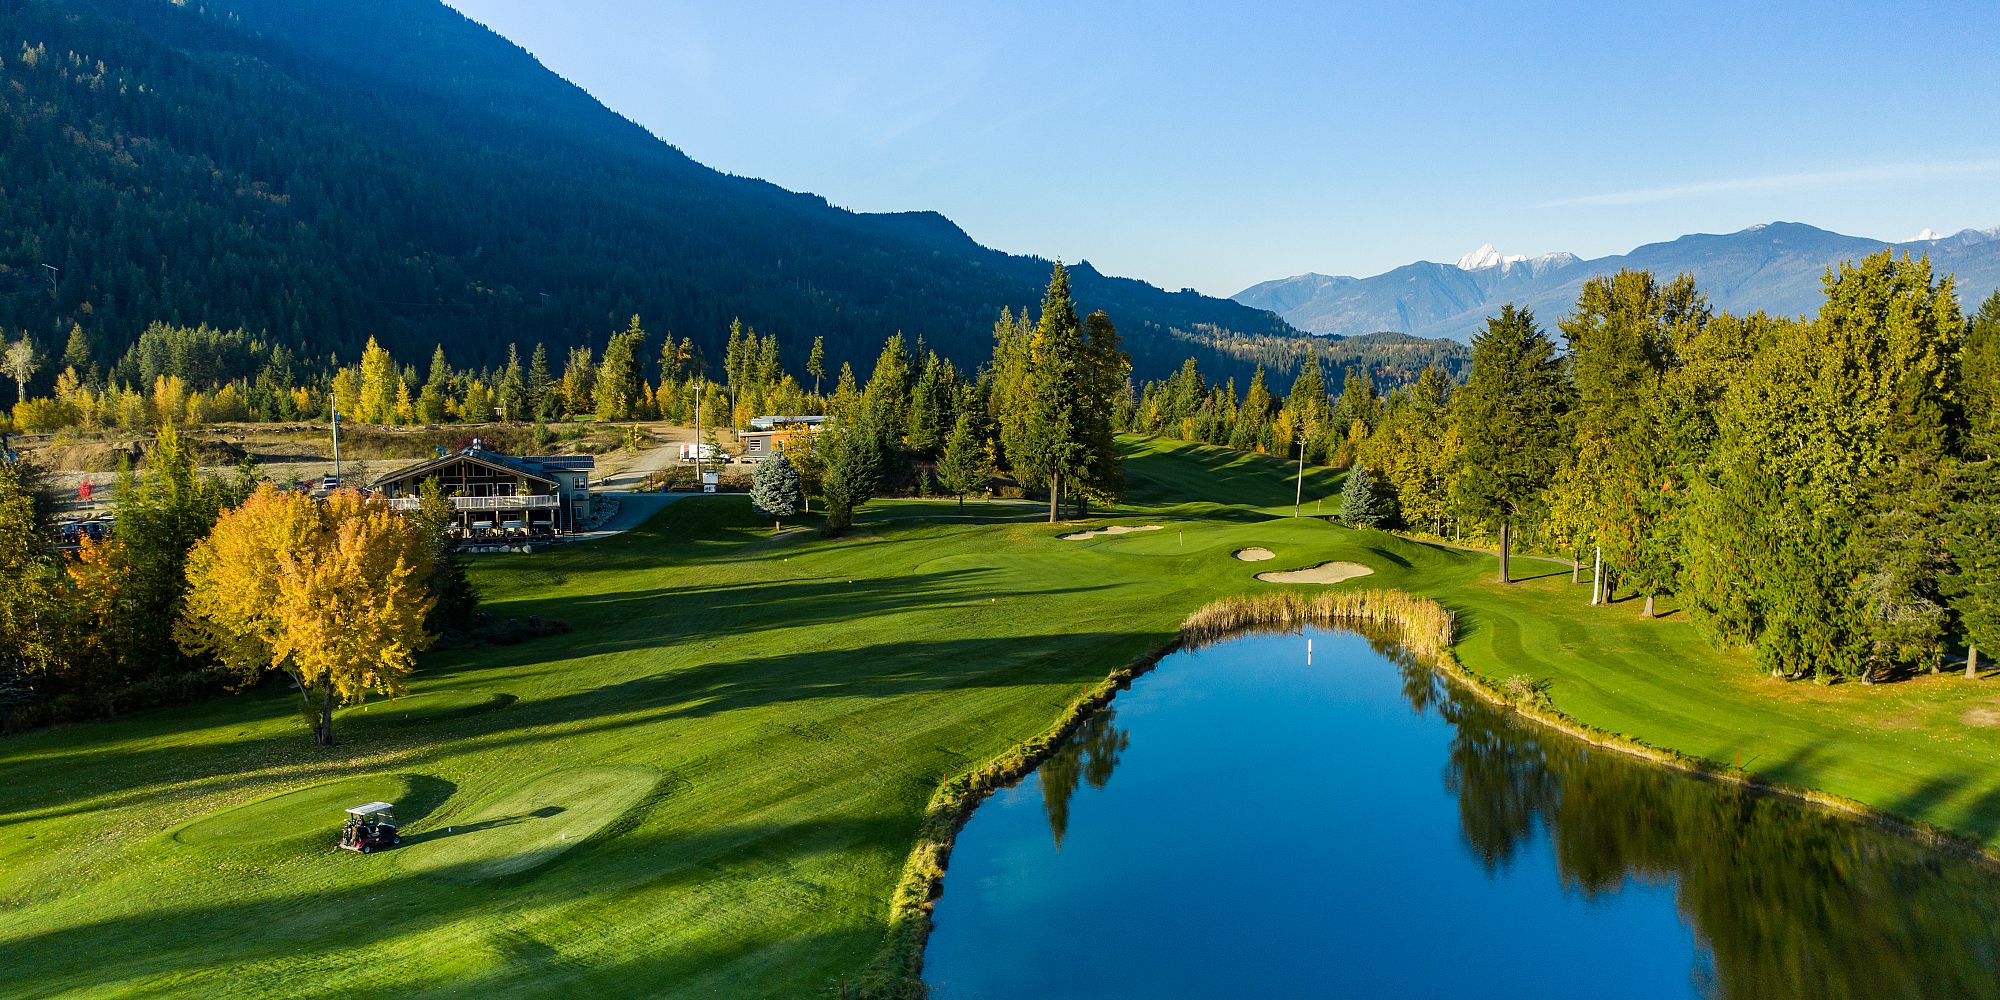 Play Among Friends at one of Nature's most Impressive Golf Courses!